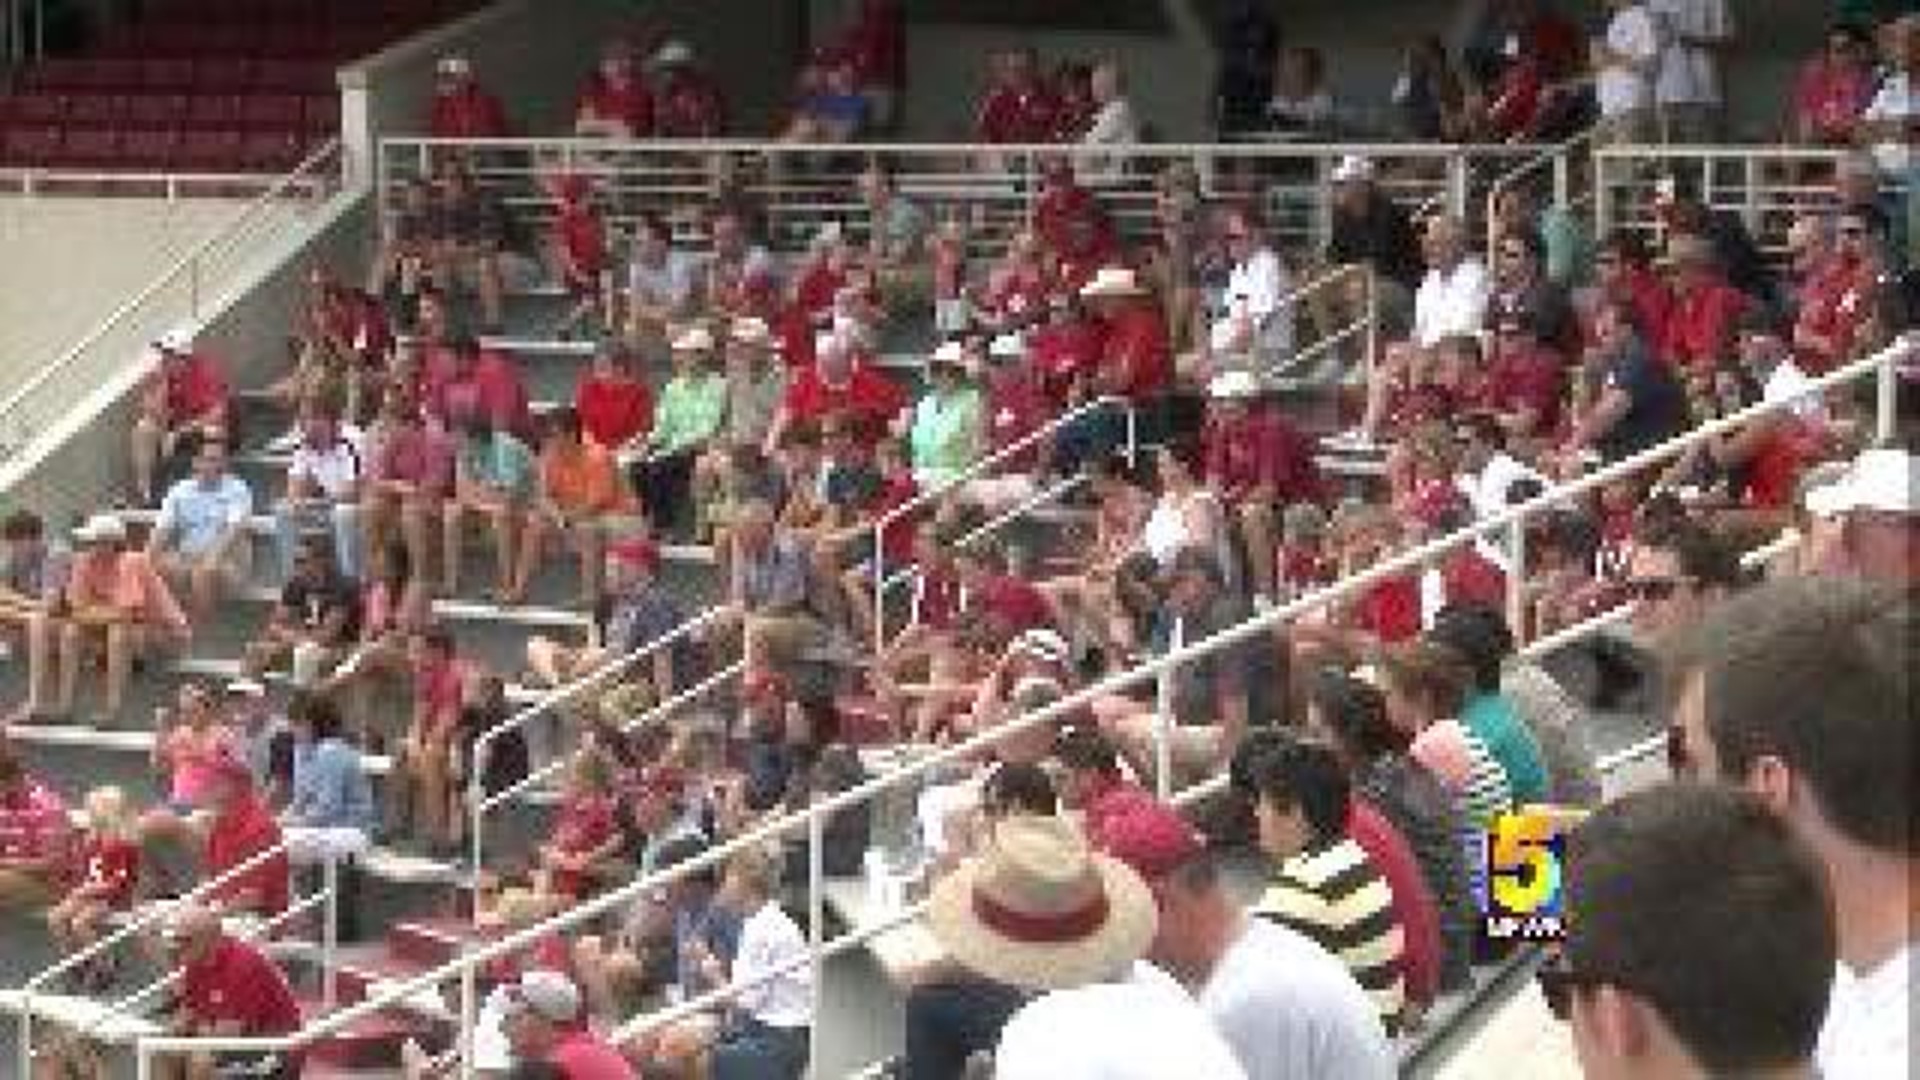 Open Scrimmage For Fans To Get First Look At Razorback Football This Season